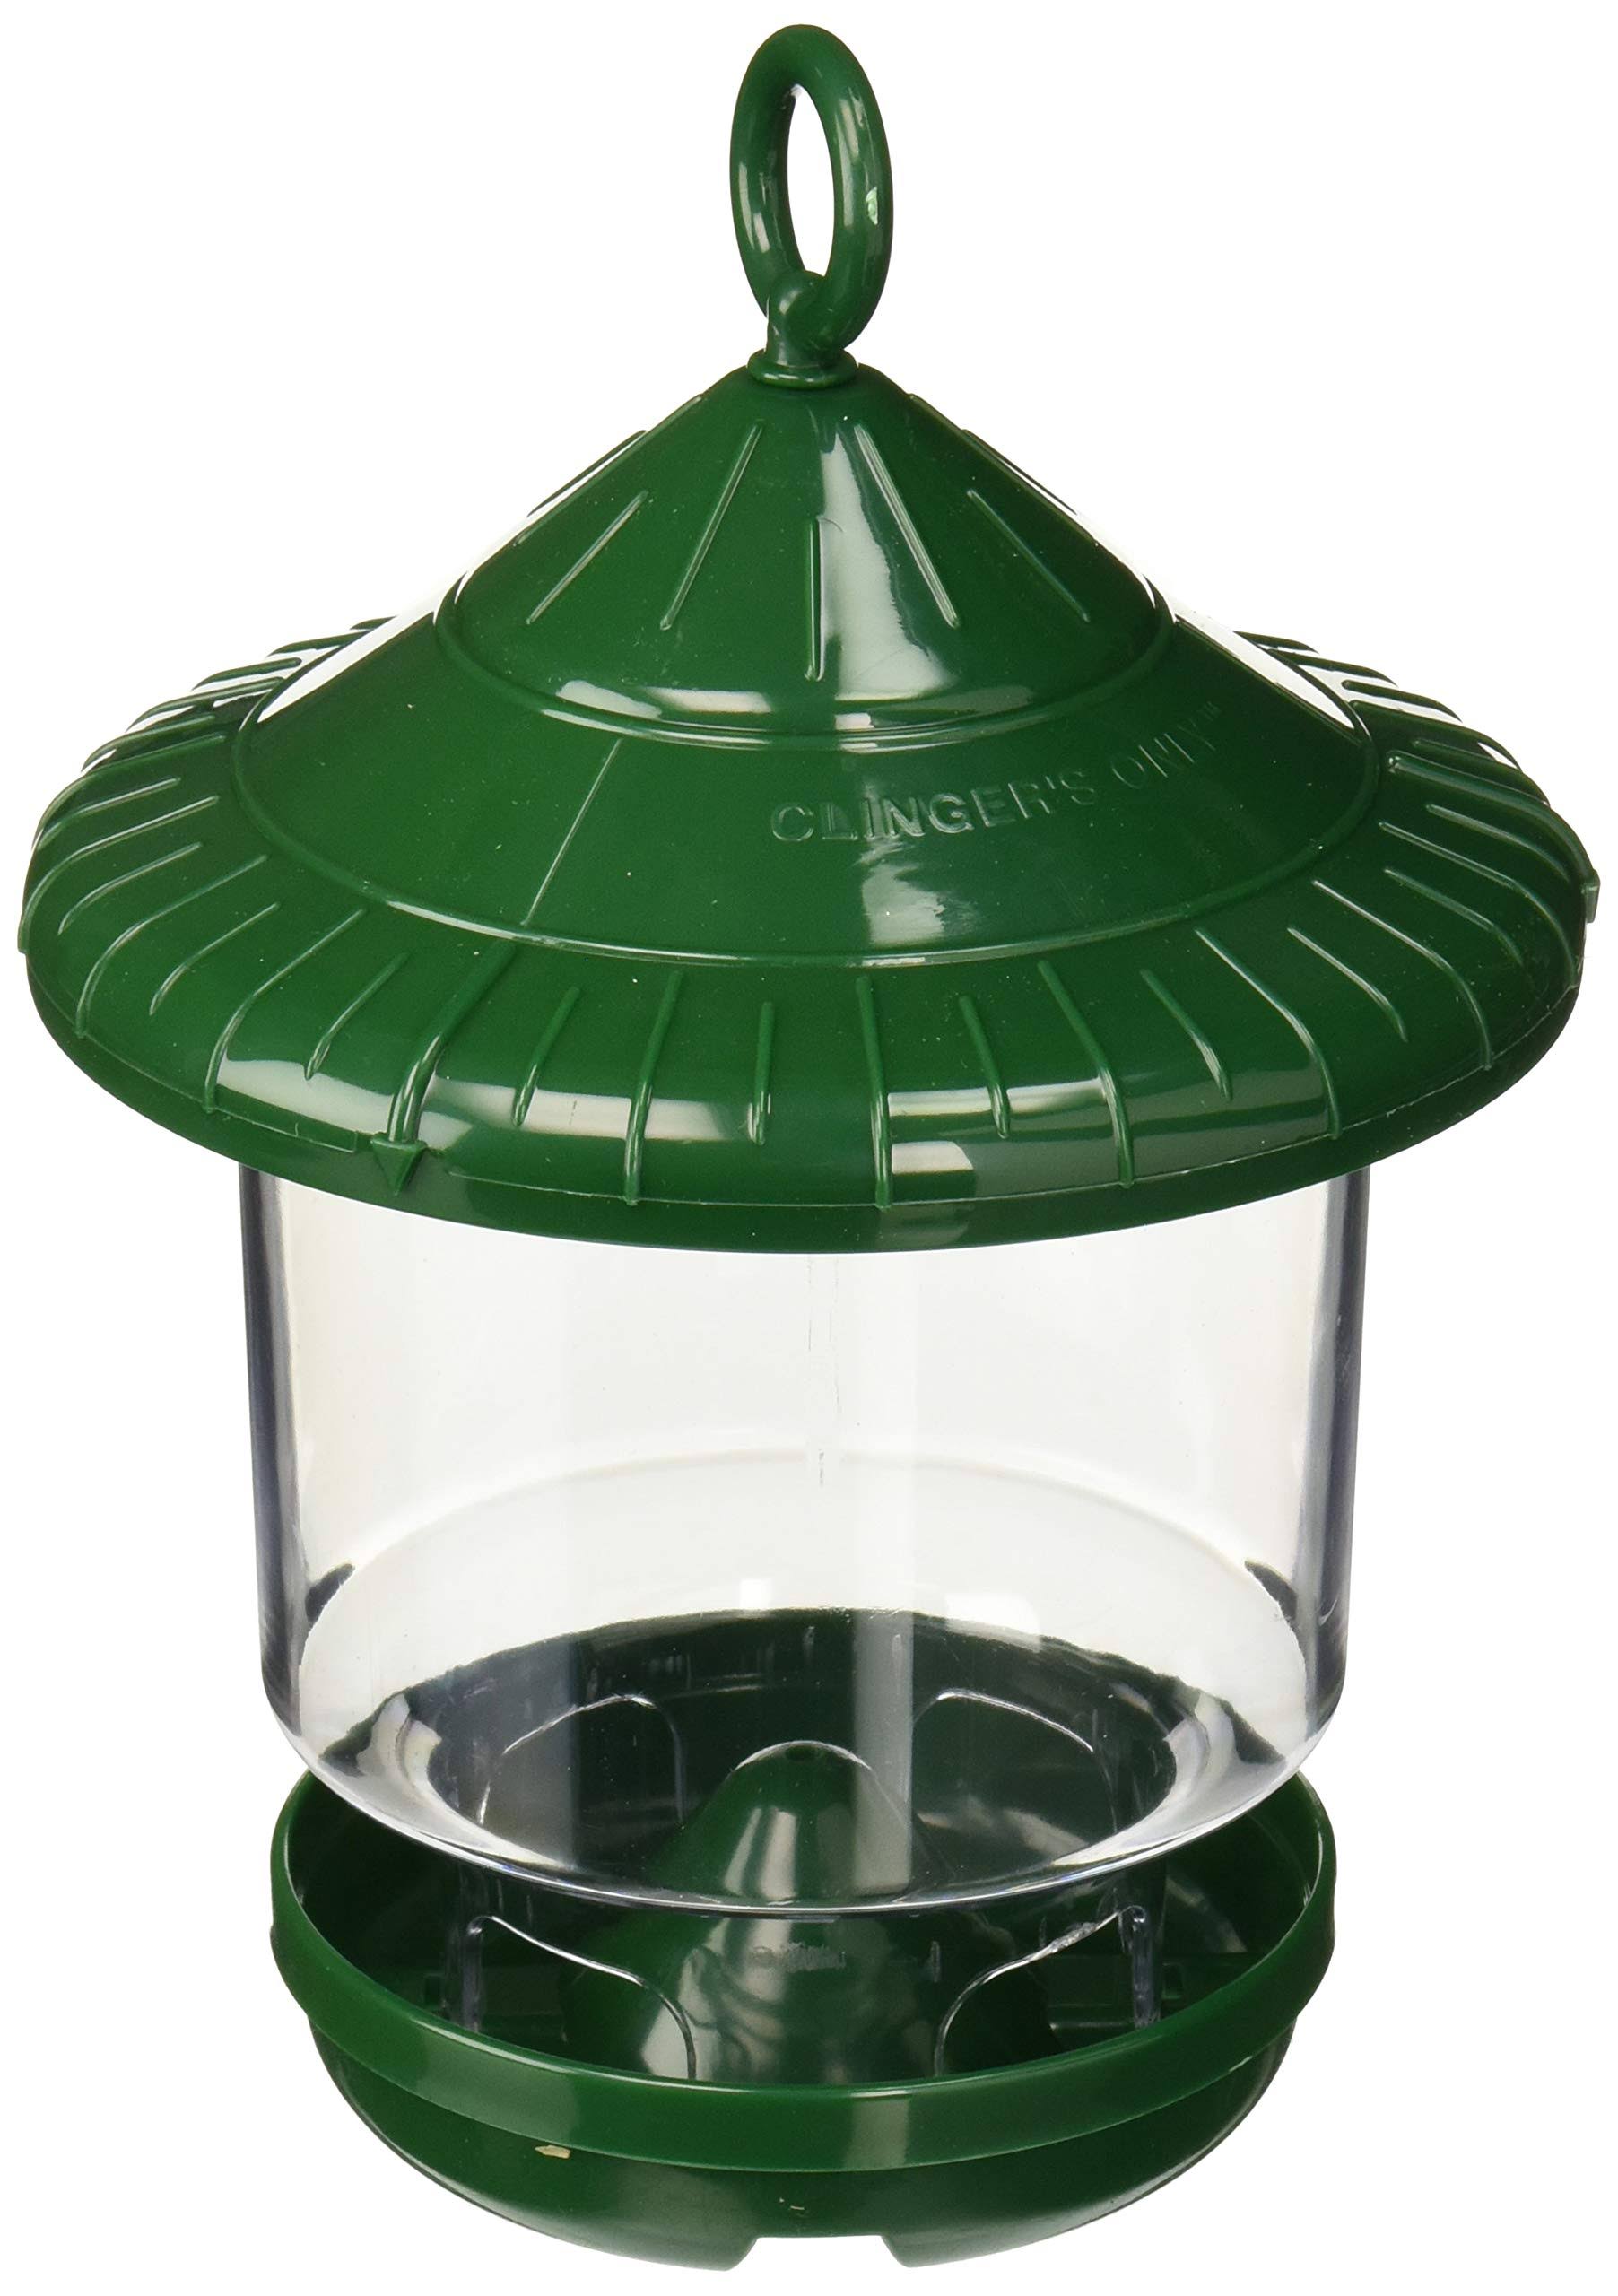 Birdquest Llc-songbird - Clingers Only Feeder- Green - SE7012 | Bird | Delivery guaranteed | Free Shipping On All Orders | Best Price Guarantee